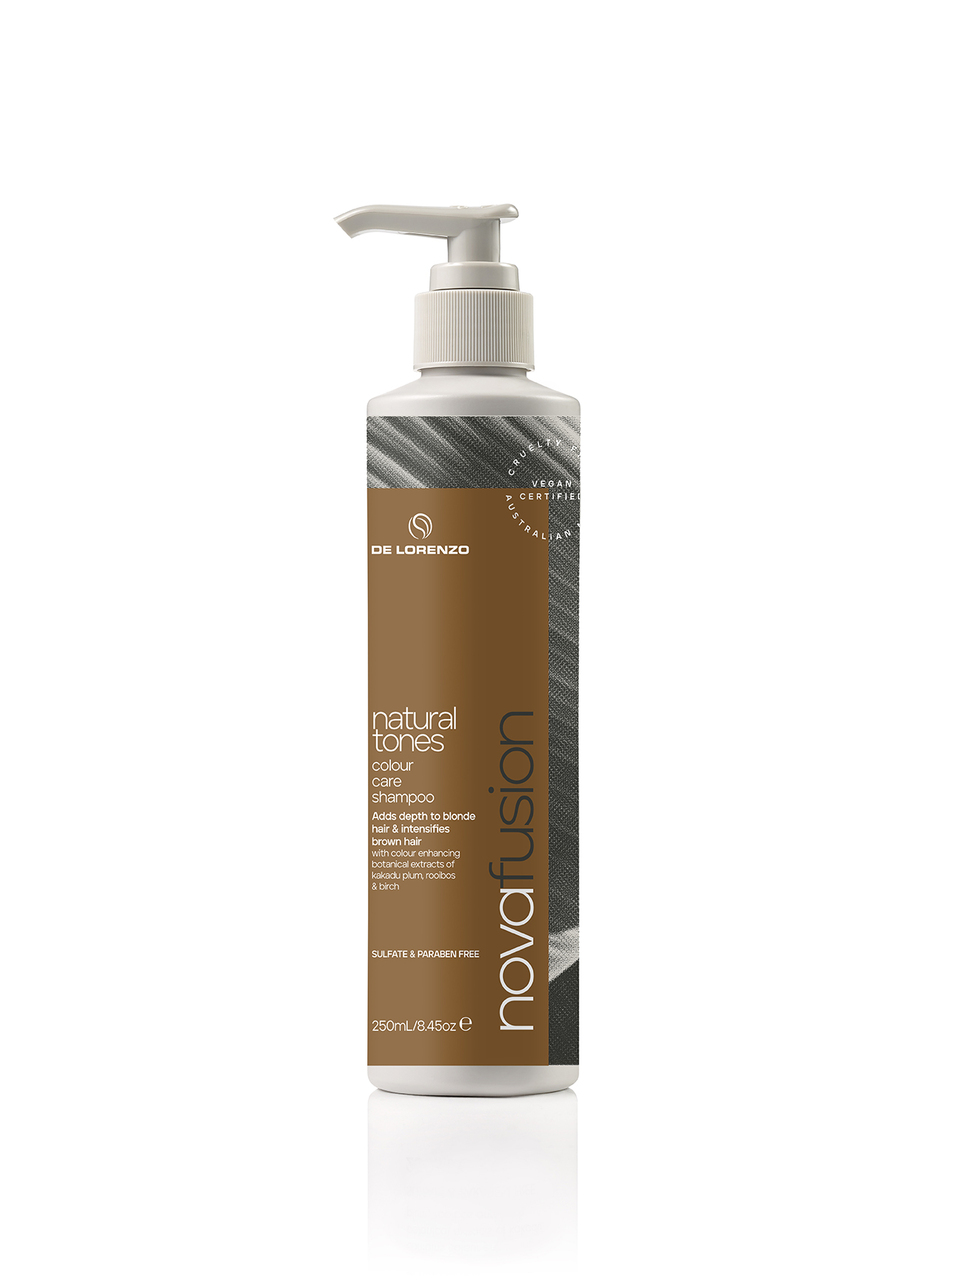 De Lorenzo Nova Fusion Natural Tones Shampoo 250ml - Hair products New  Zealand | Nation wide hairdressing & hair care group